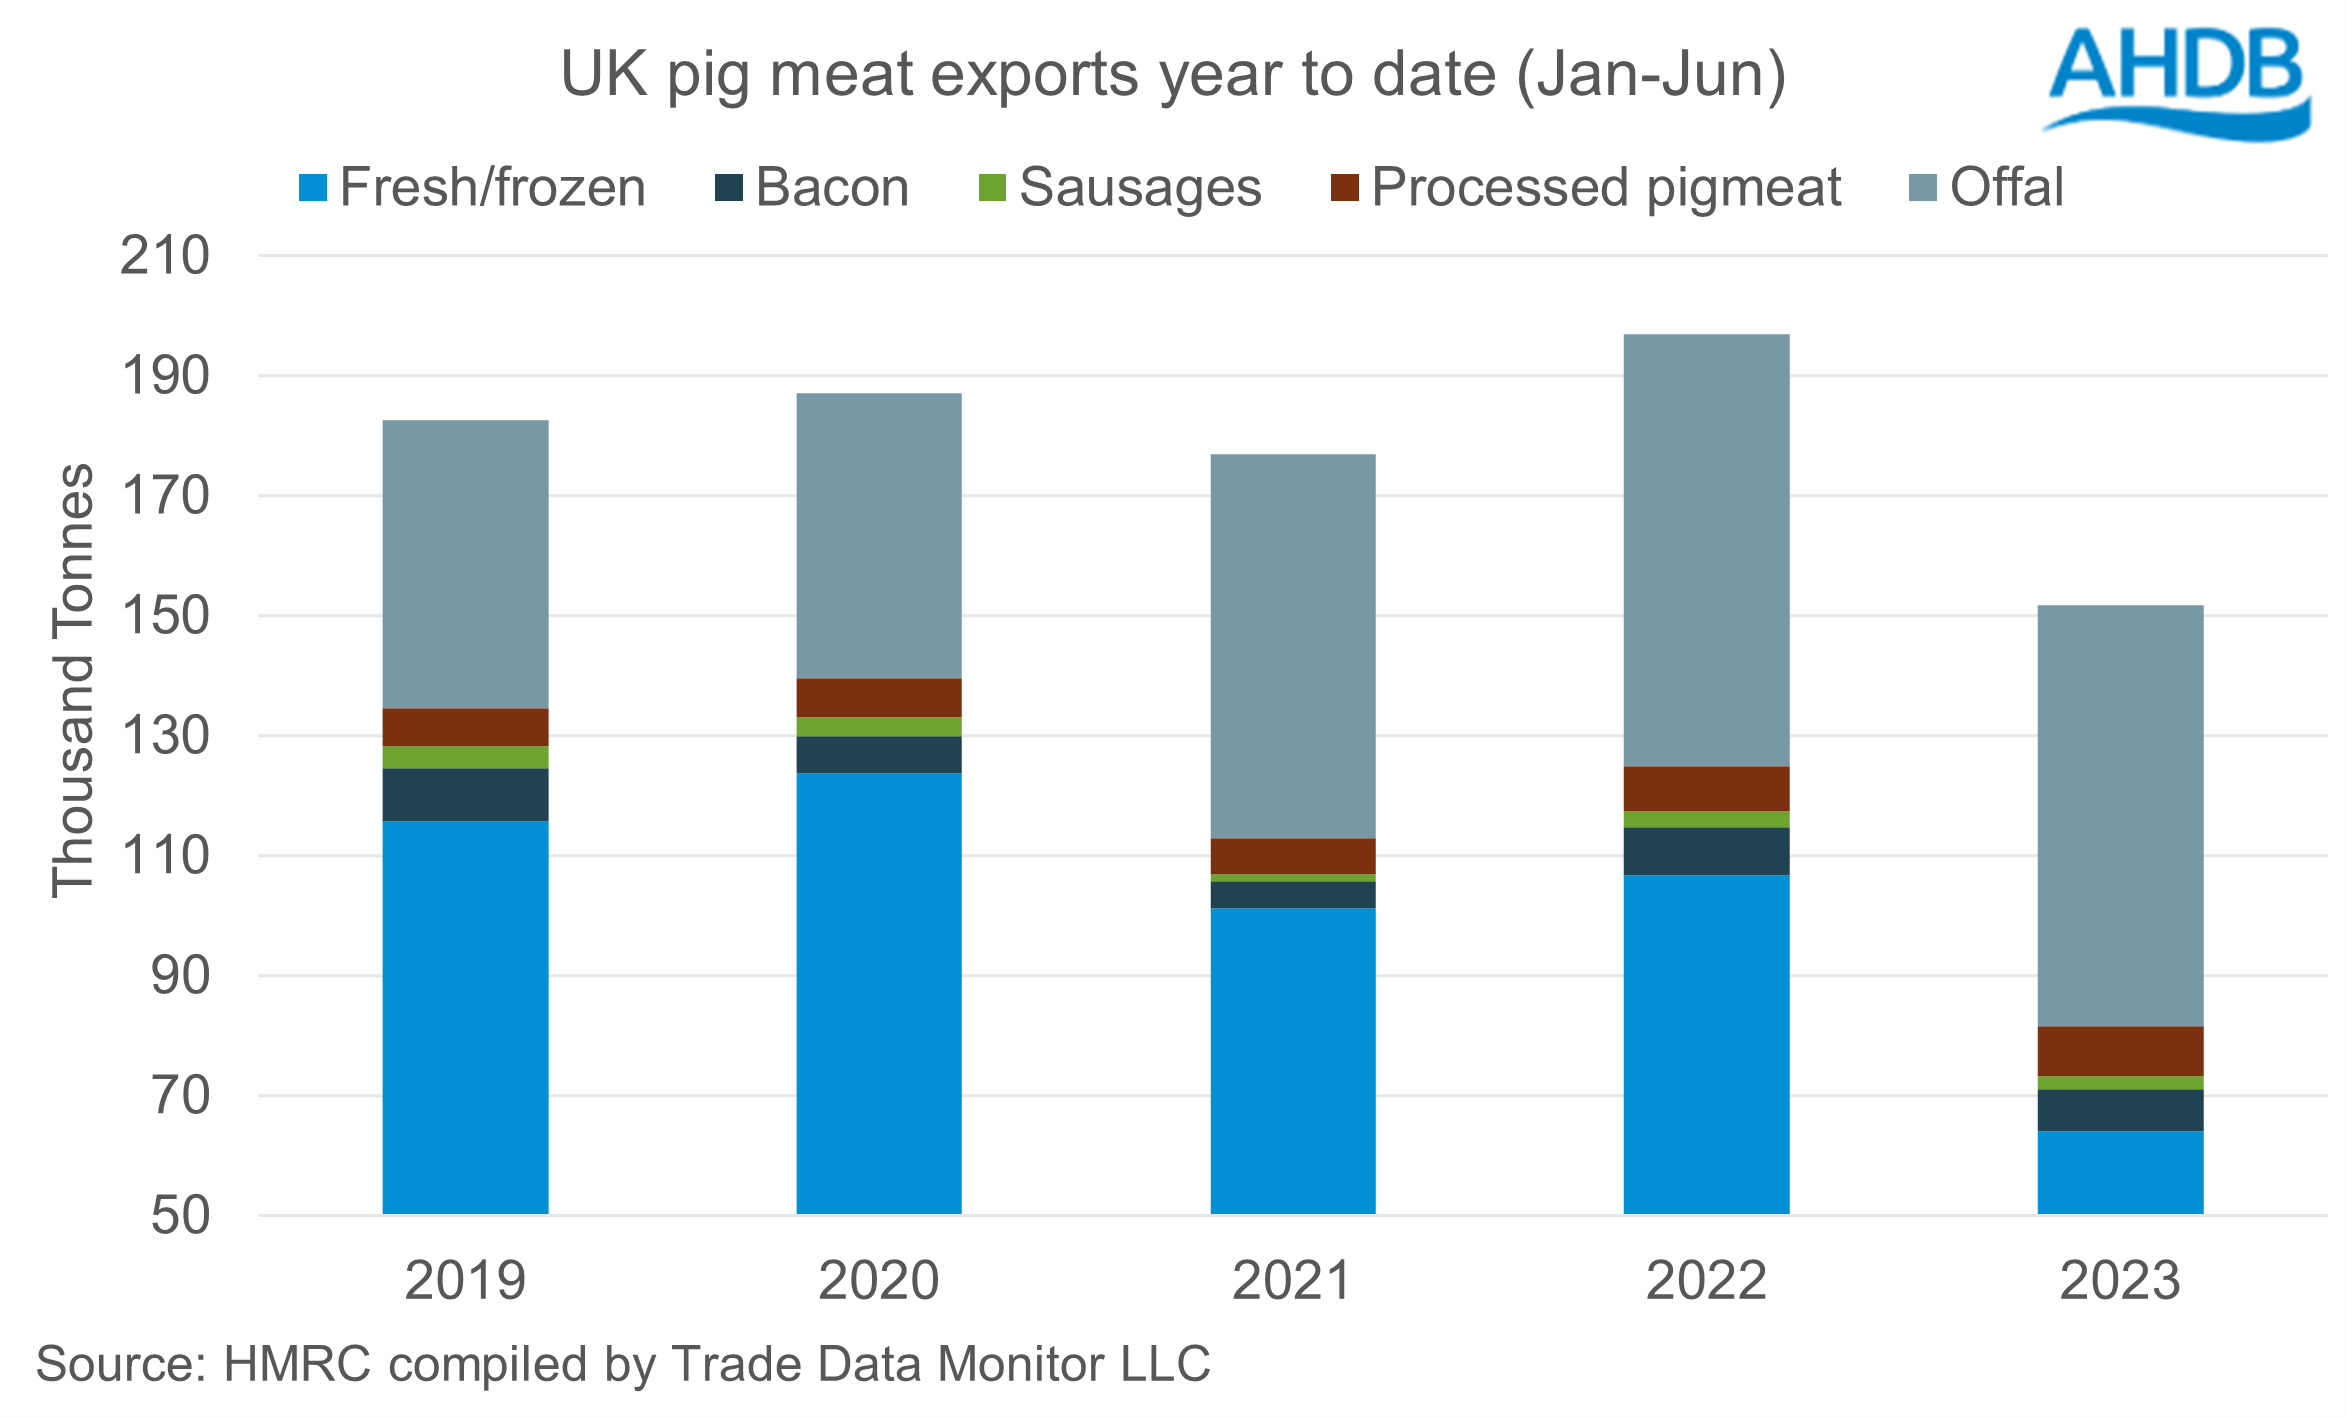 stacked bar chart showing UK pig meat export volumes Jan-Jun by product type